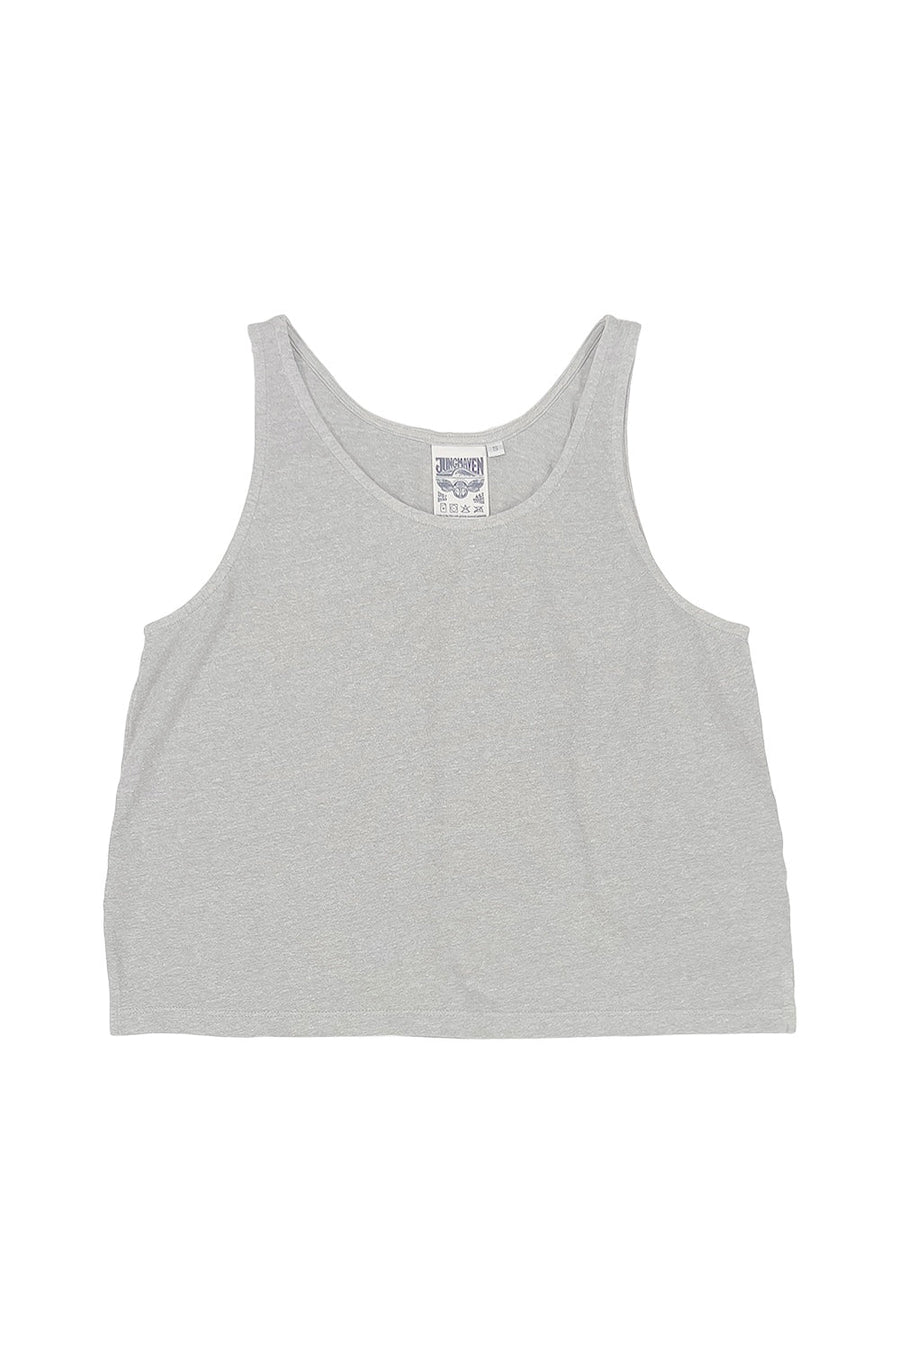 CROPPED TANK TOP - ATHLETIC GREY